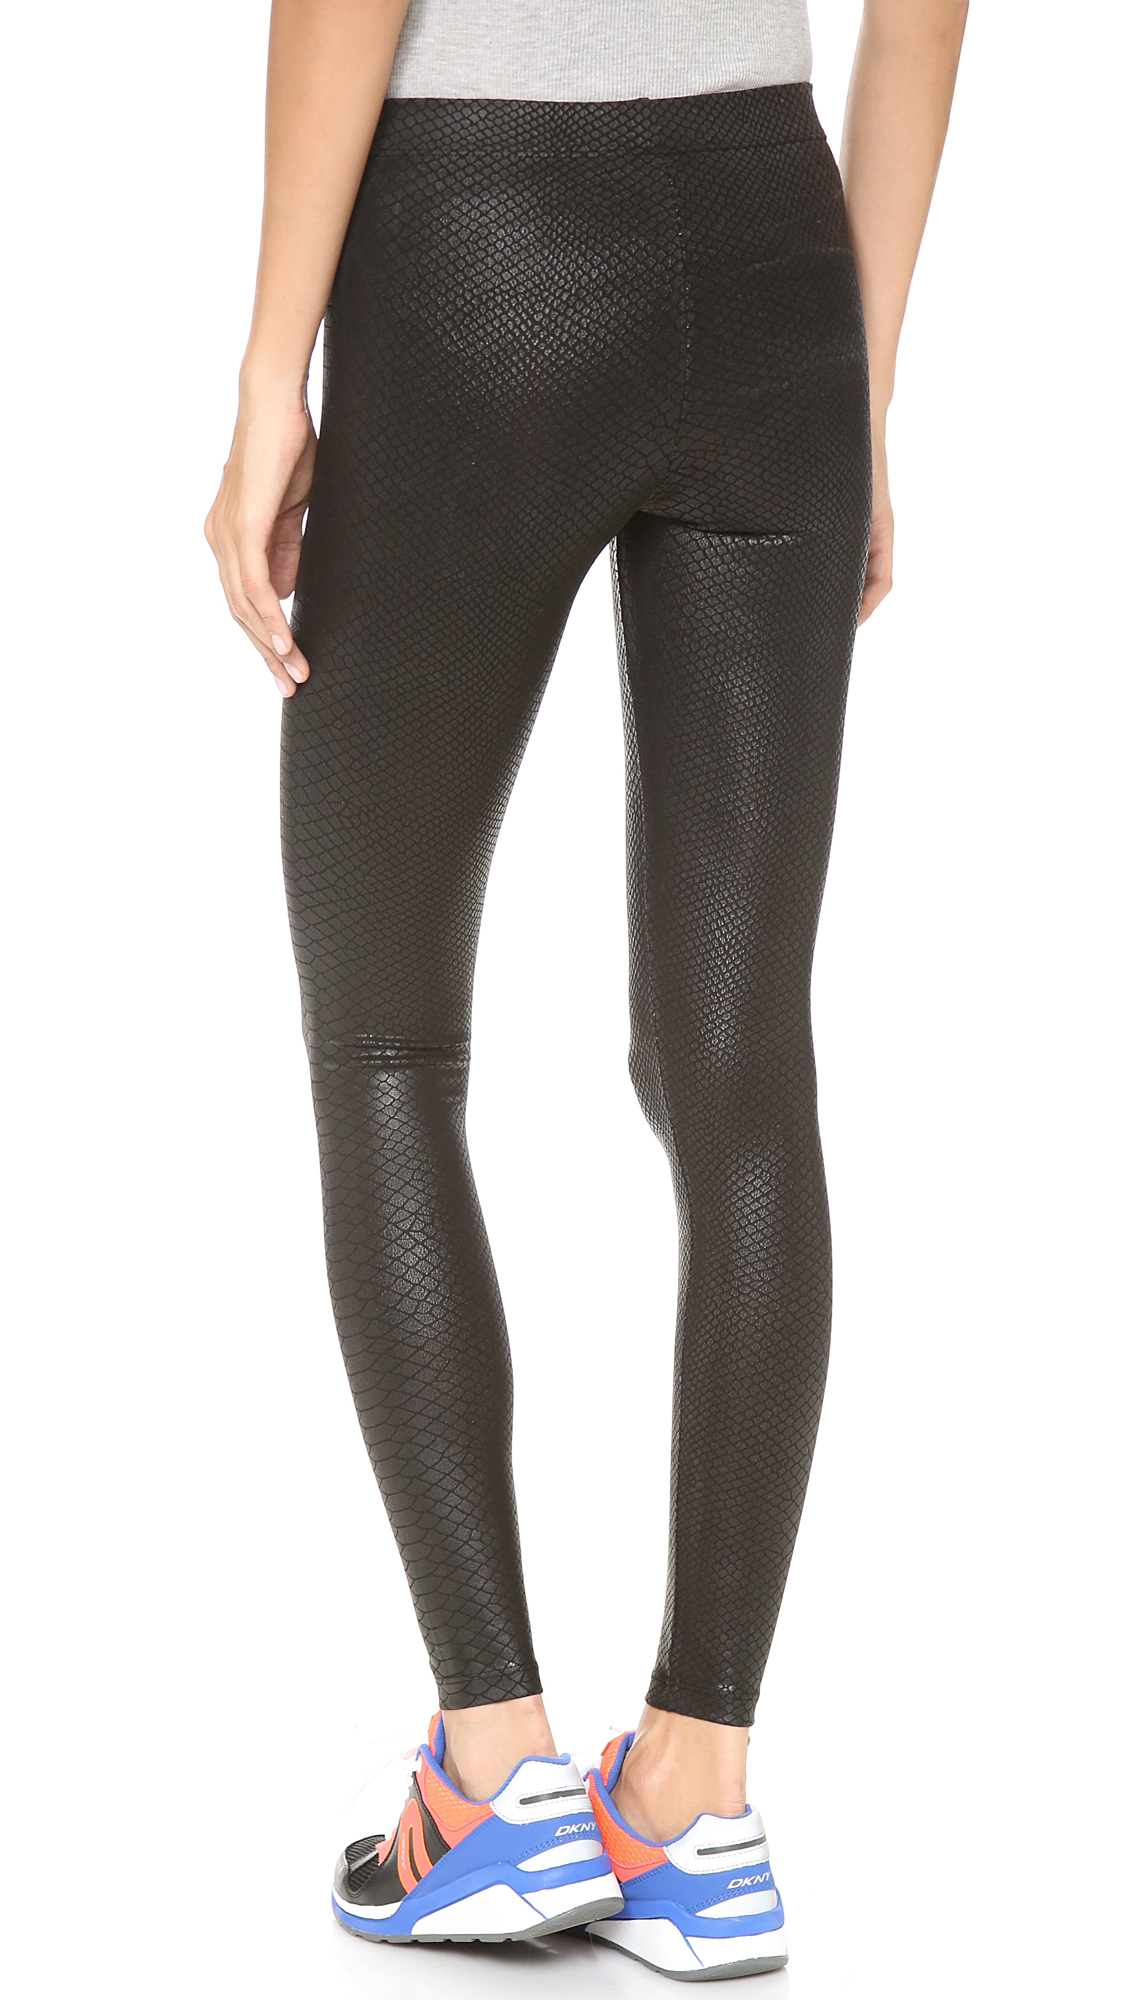 Yours Sincerely Coated Leggings